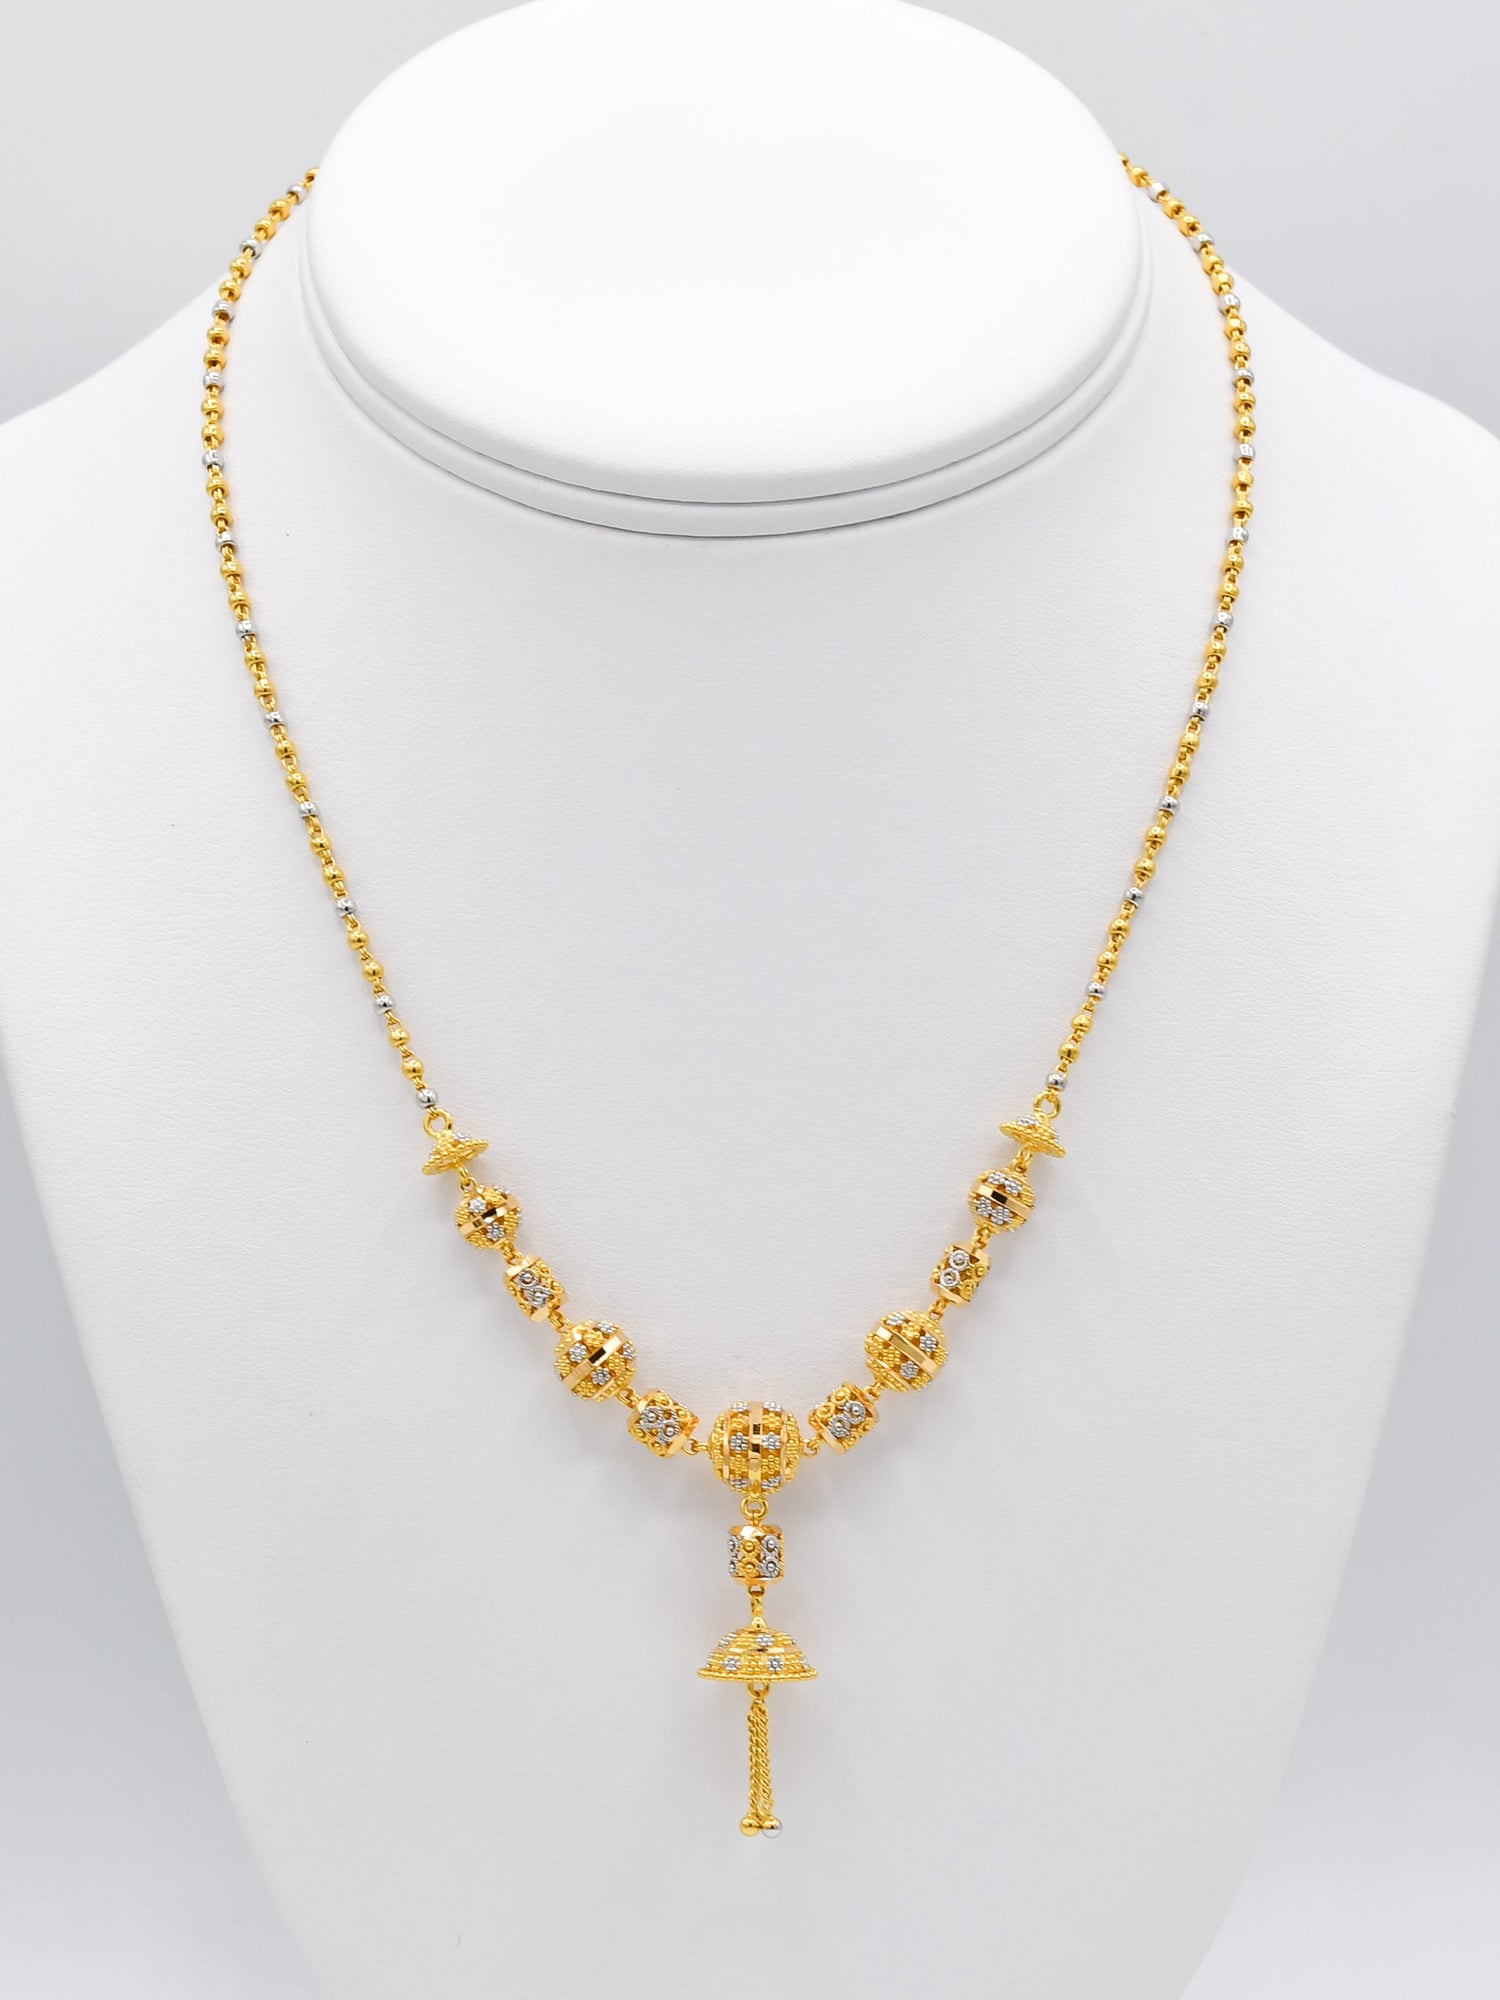 22ct Gold Two Tone Ball Necklace Set - Roop Darshan